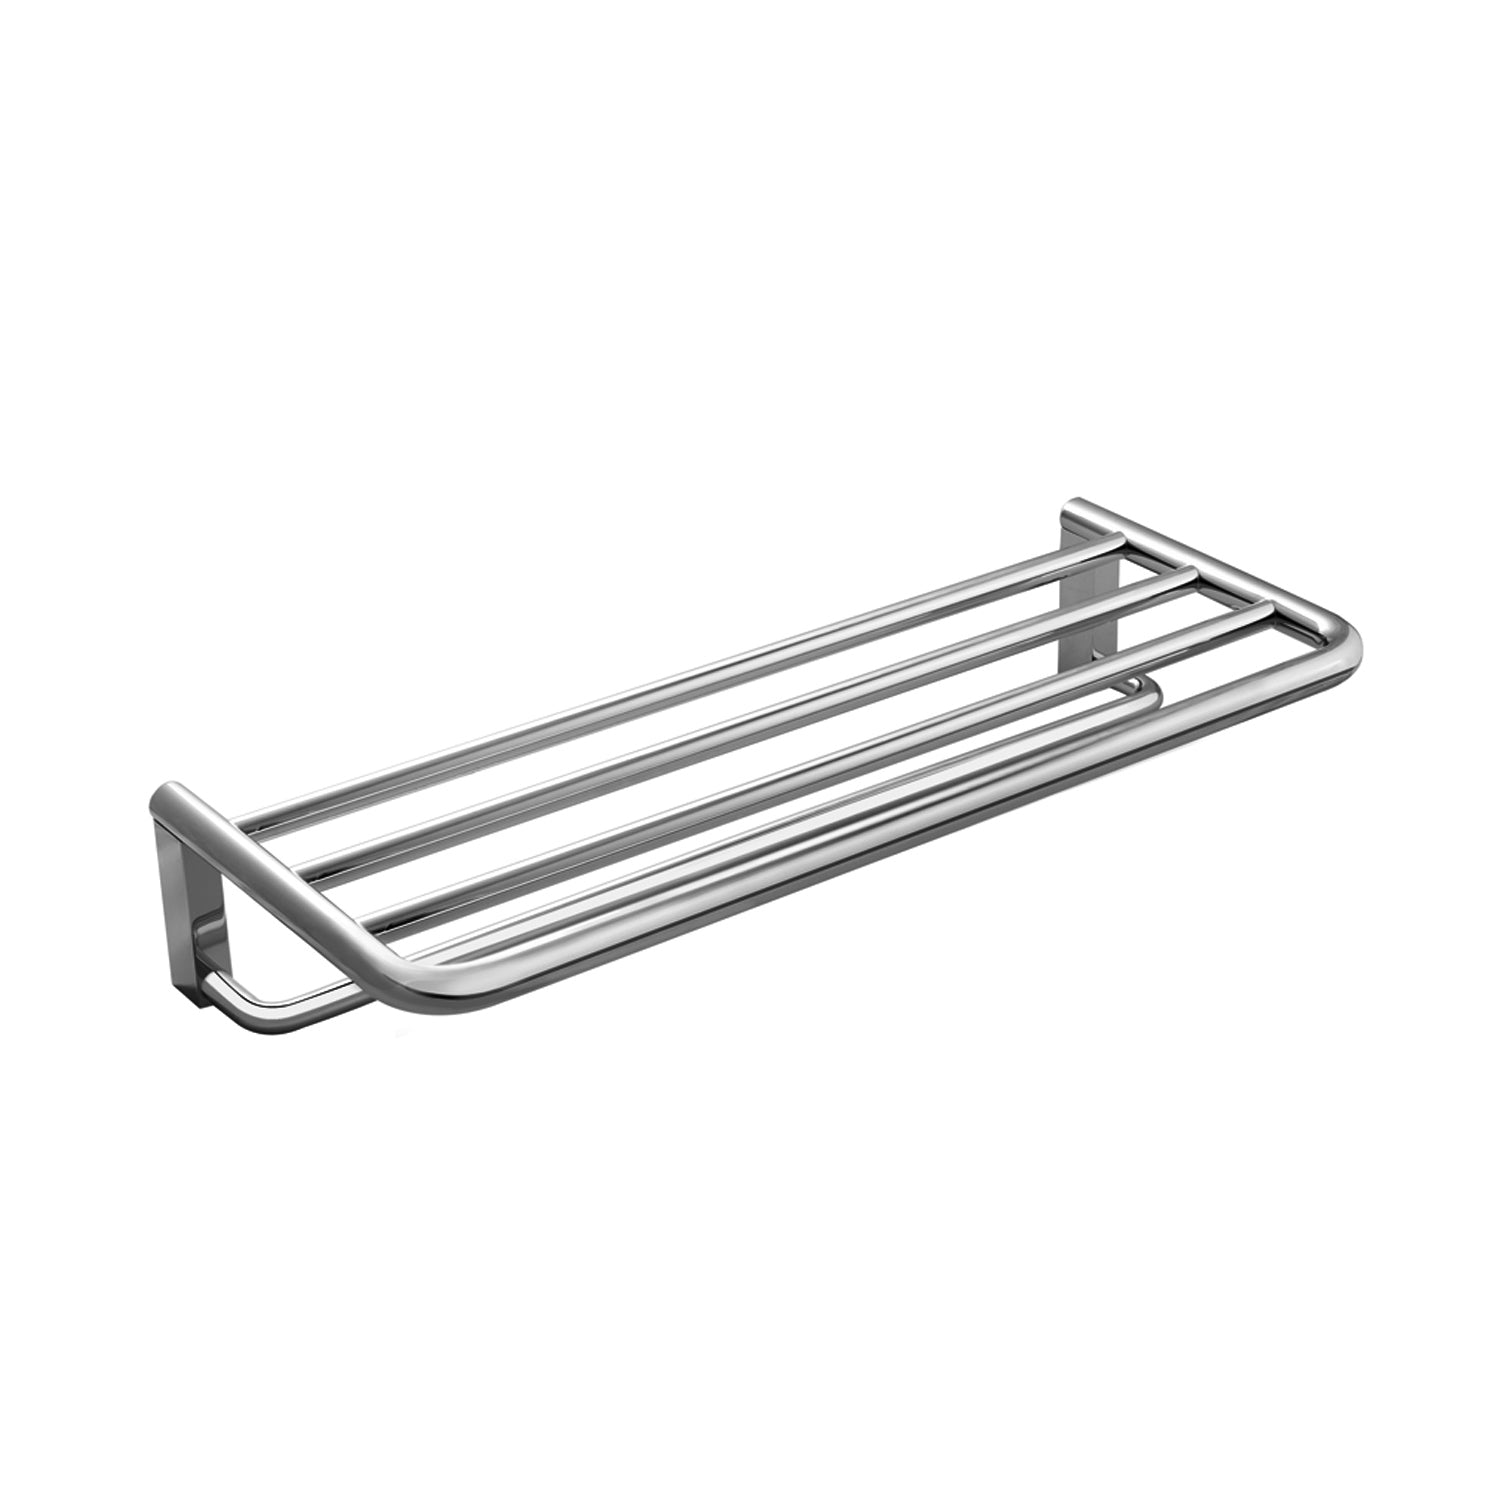 COSMIC Project  Towel Rack with Shelf, Wall Mount, Brass Body, Chrome Finish, 23-5/8 x 4-5/16 x 9-13/16 Inches (2510168)